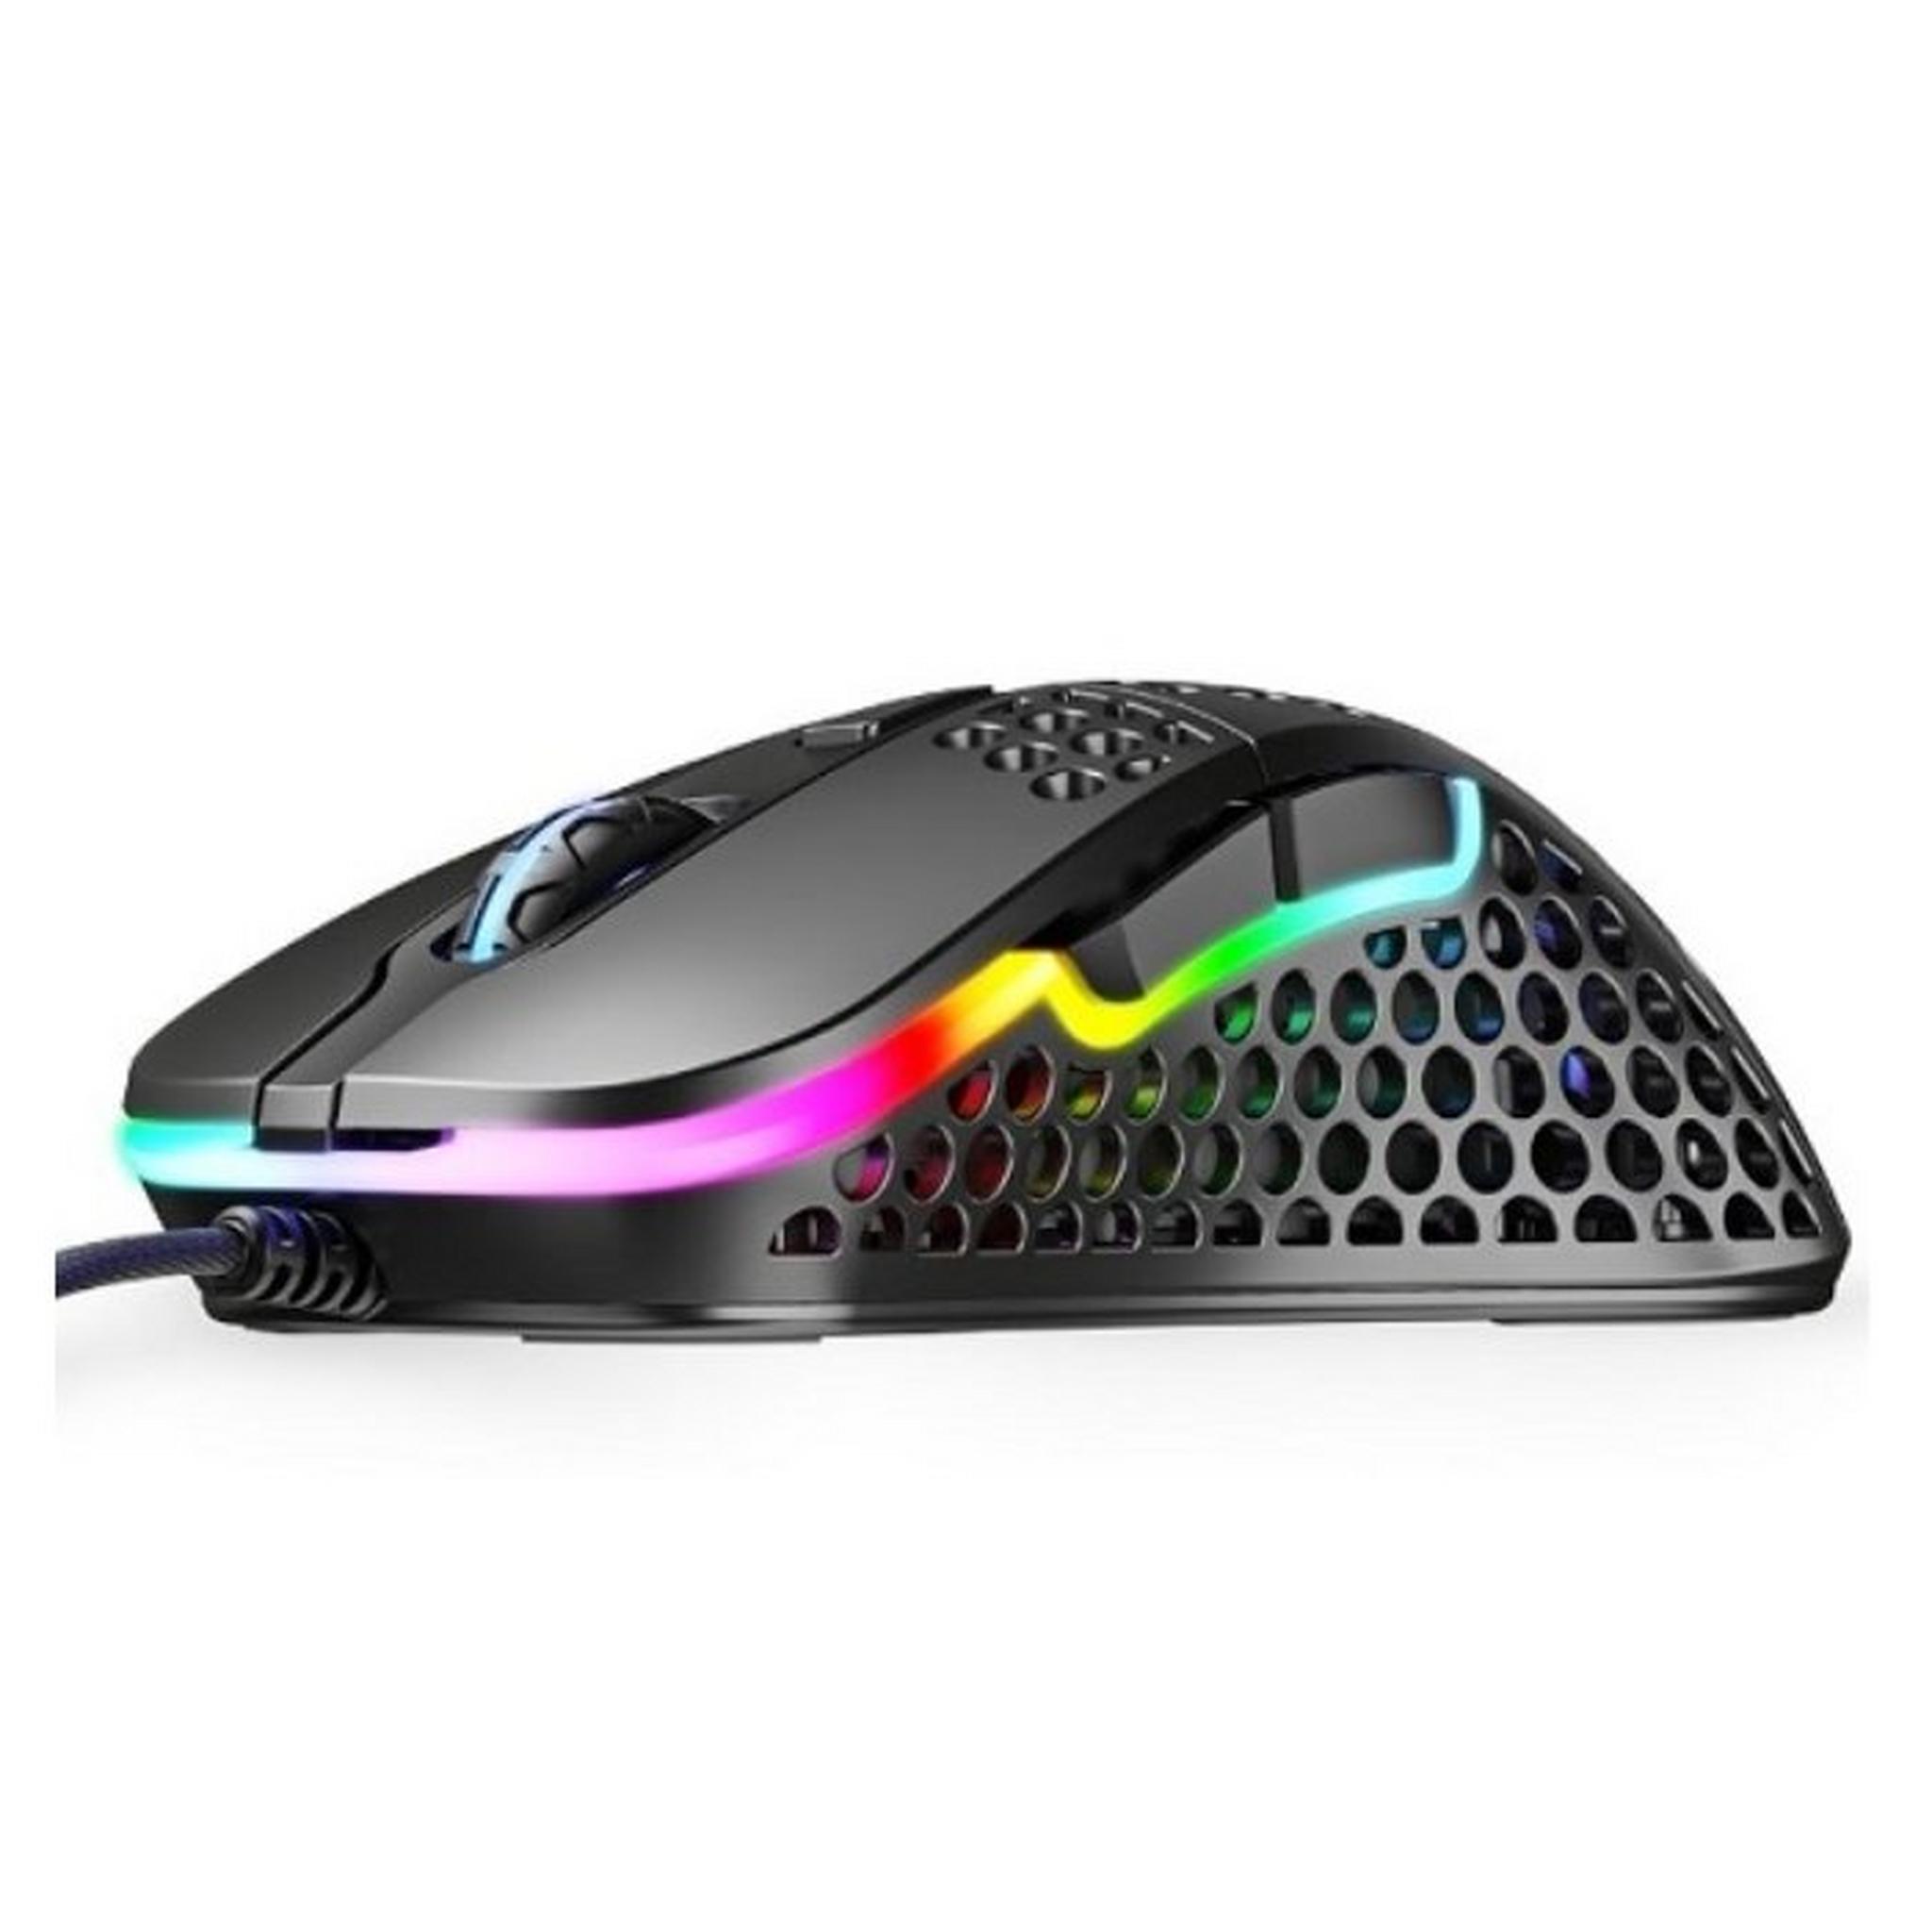 Xtrfy M4 RGB Wired Mouse - Black